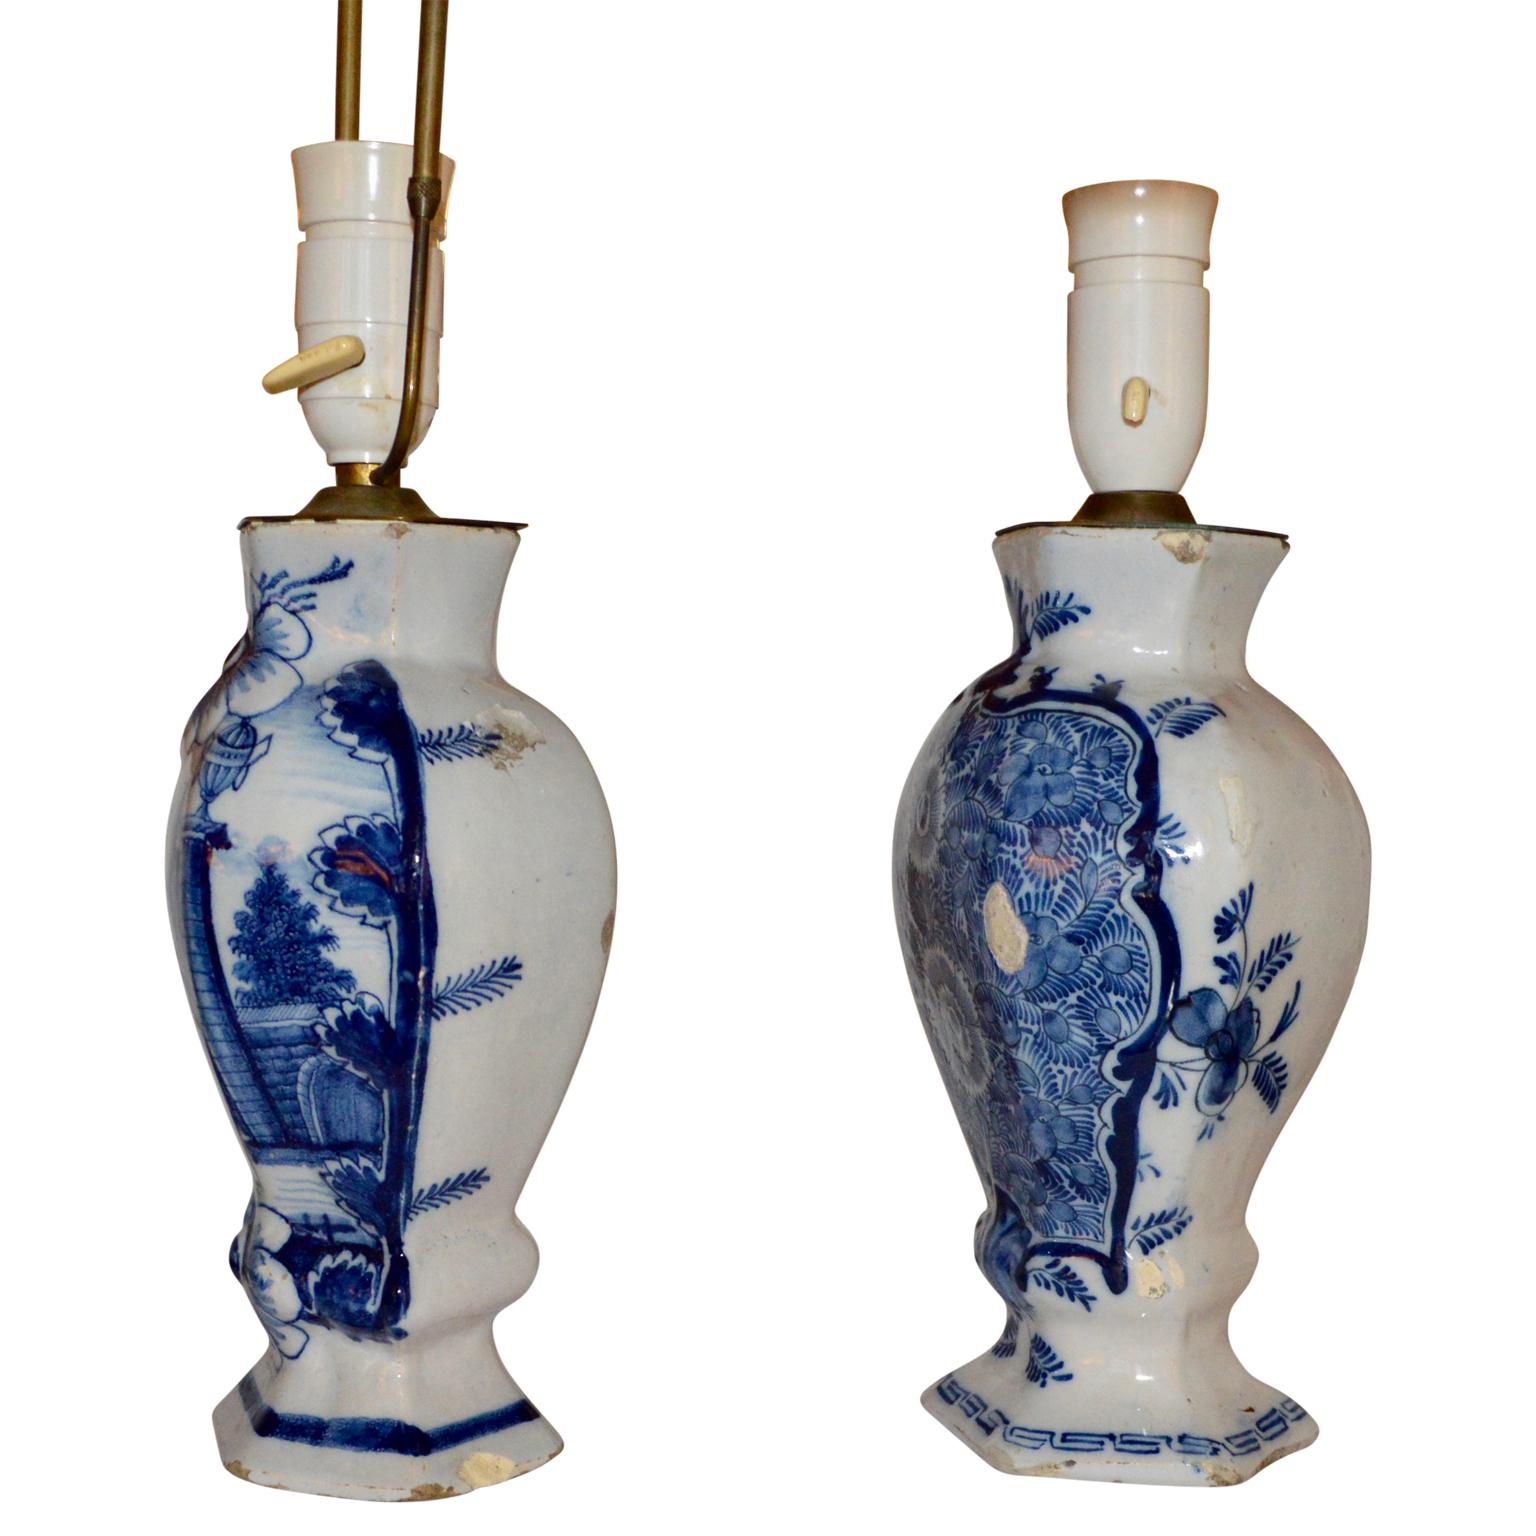 Pair Of 18th Century Blue And White Delft Table Lamps im Zustand „Gut“ in Haddonfield, NJ